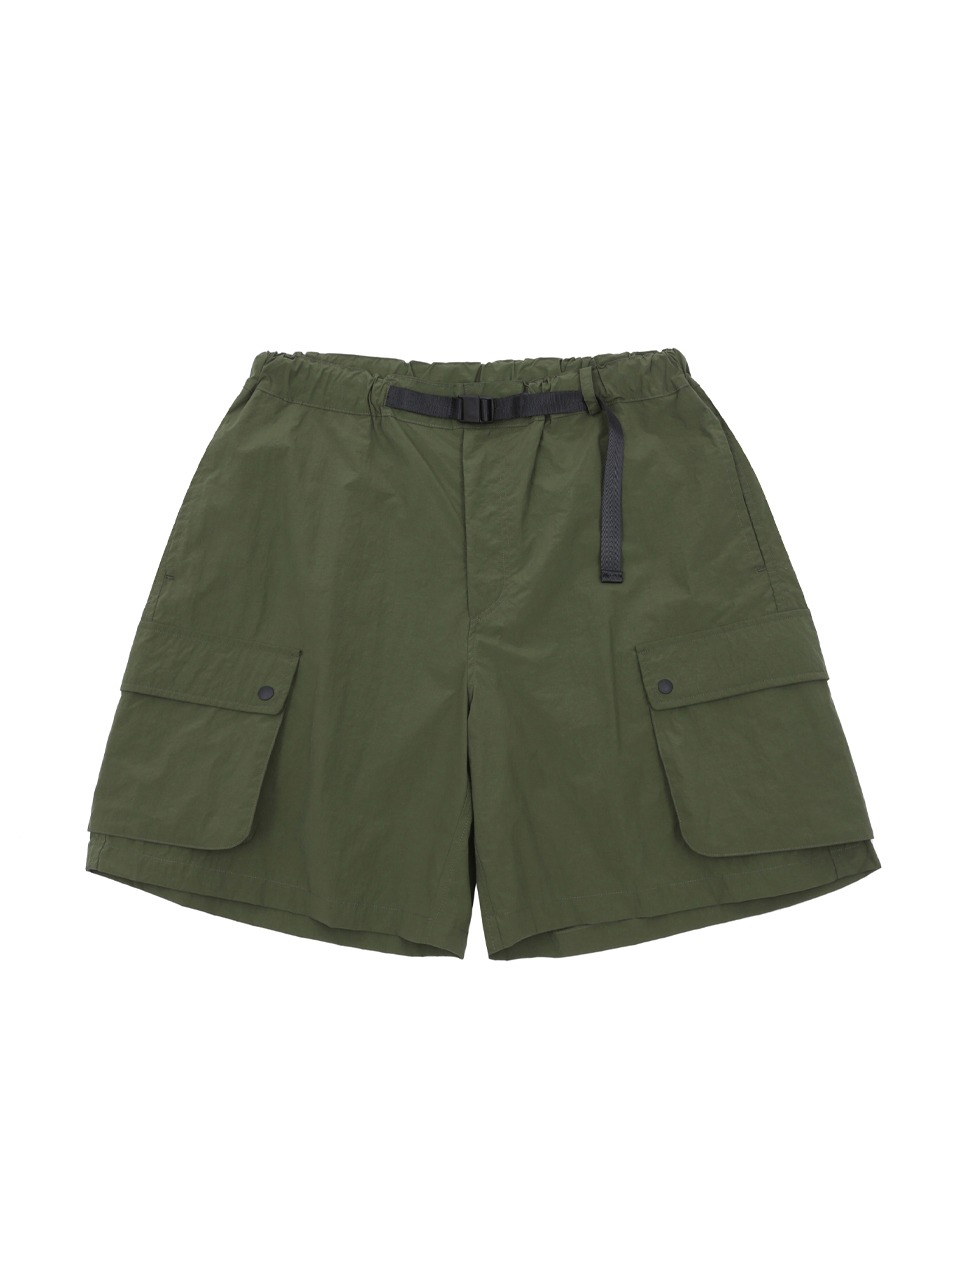 HAVEOFFDUTY - RUSTLE COMPACT SHORTS (OLIVE)